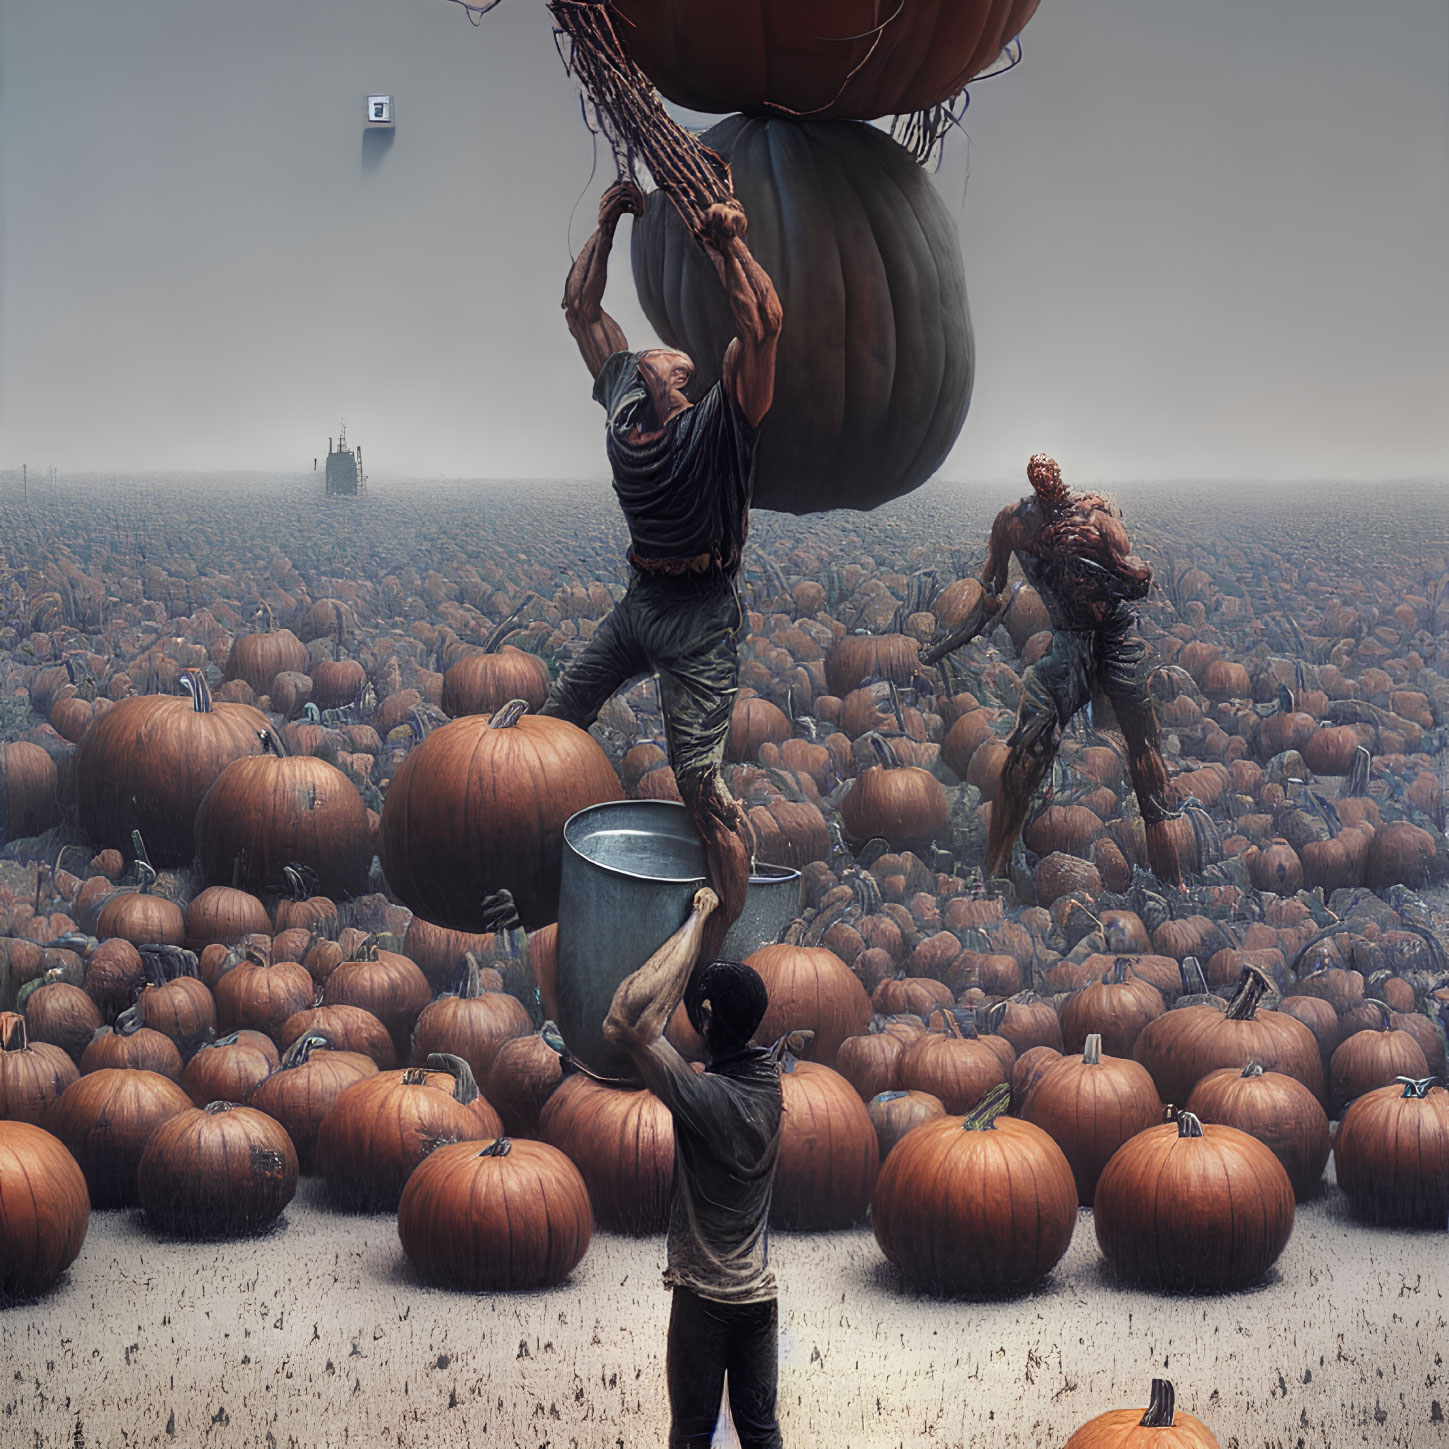 Three people in a pumpkin field with unique actions depicted.